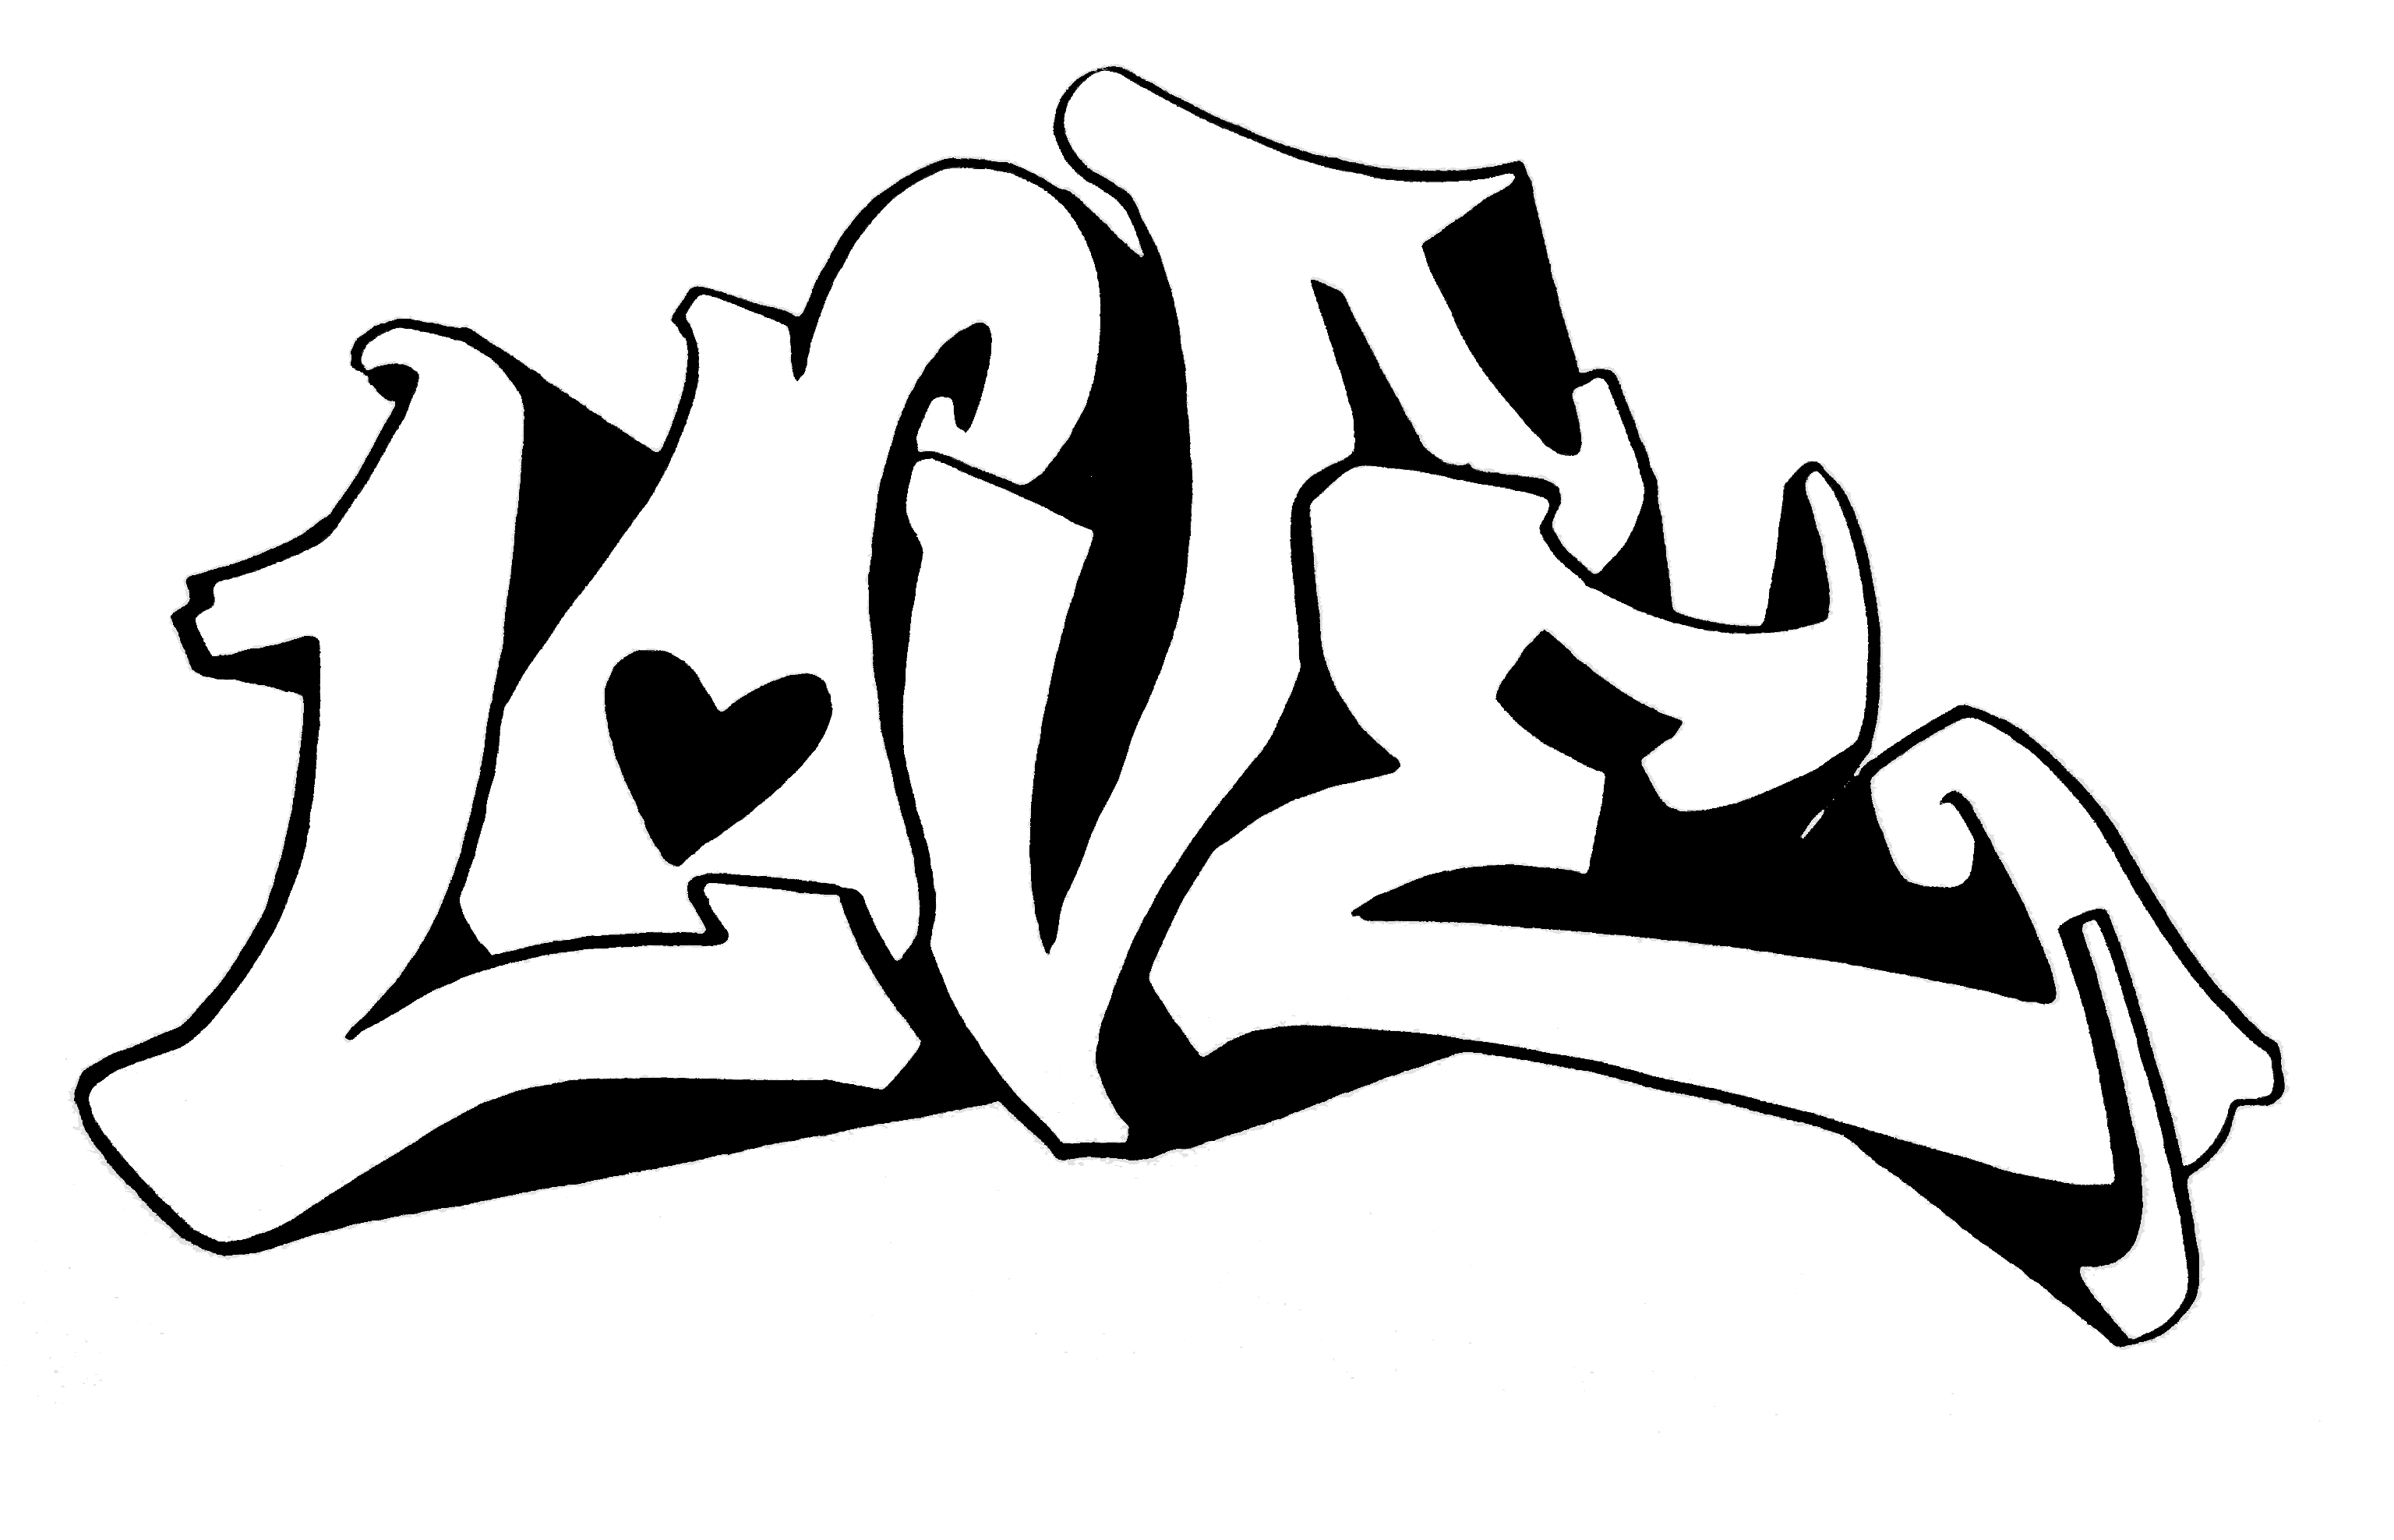 Graffiti Coloring Pages for Teens and Adults   Best Coloring Pages ...